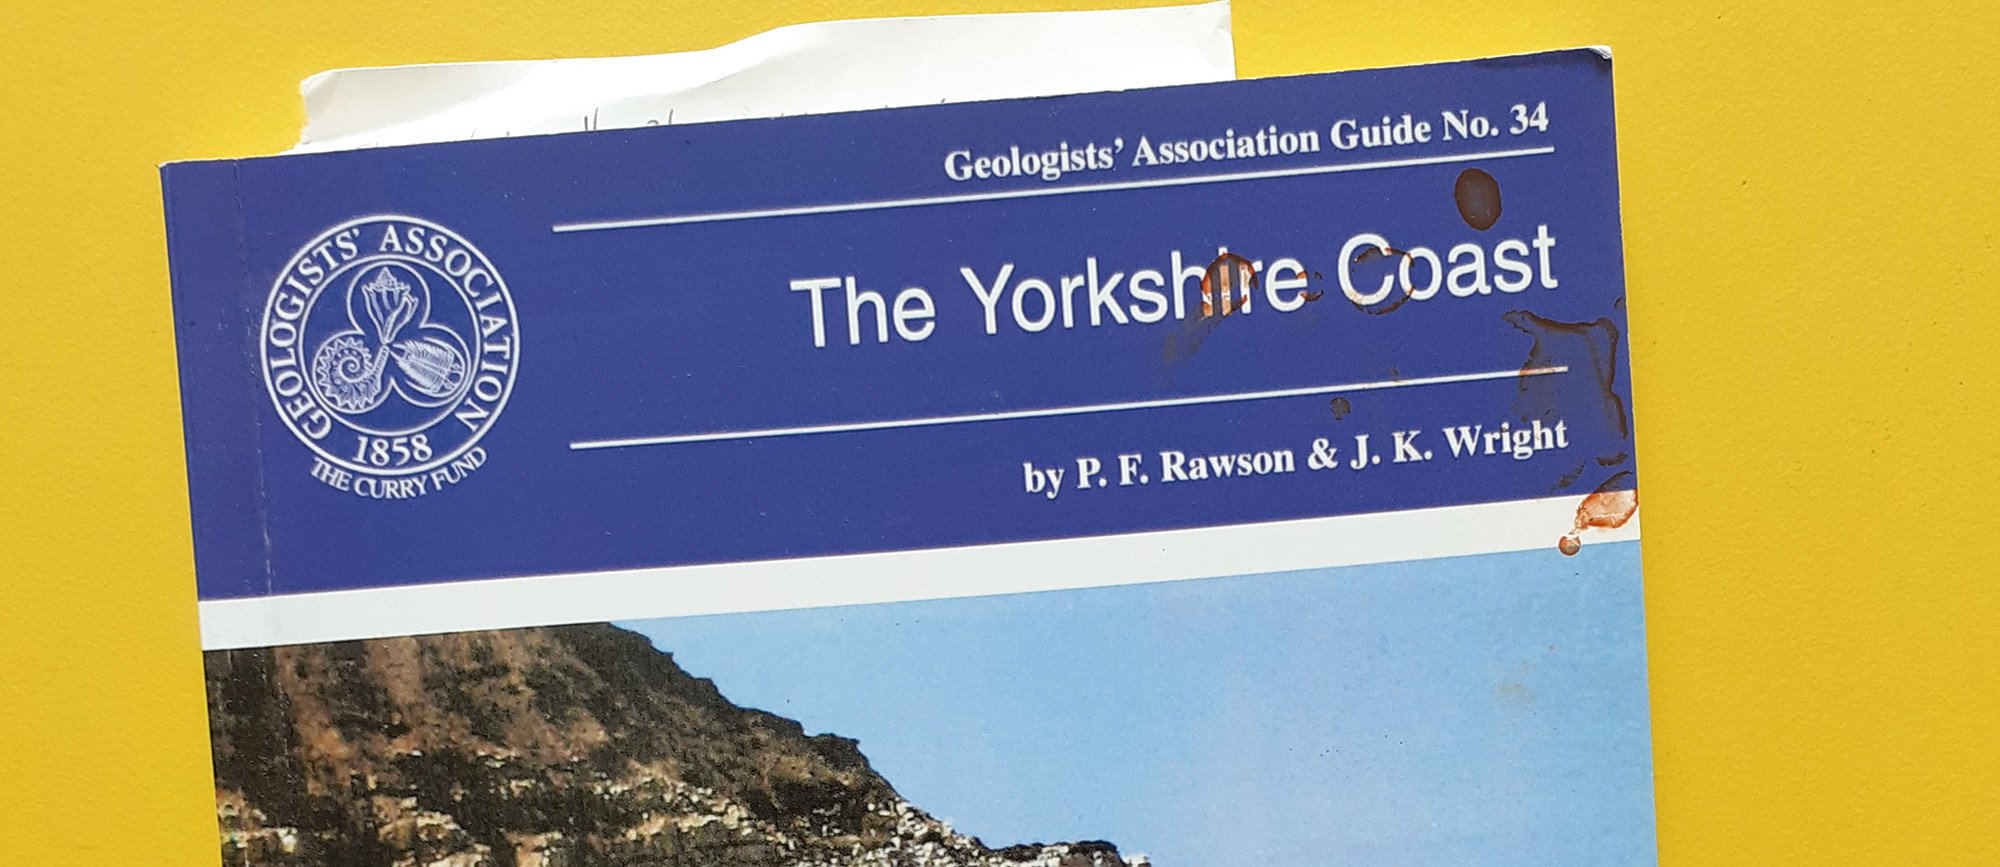 Geologists' Association Guide 34 The Yorkshire Coast